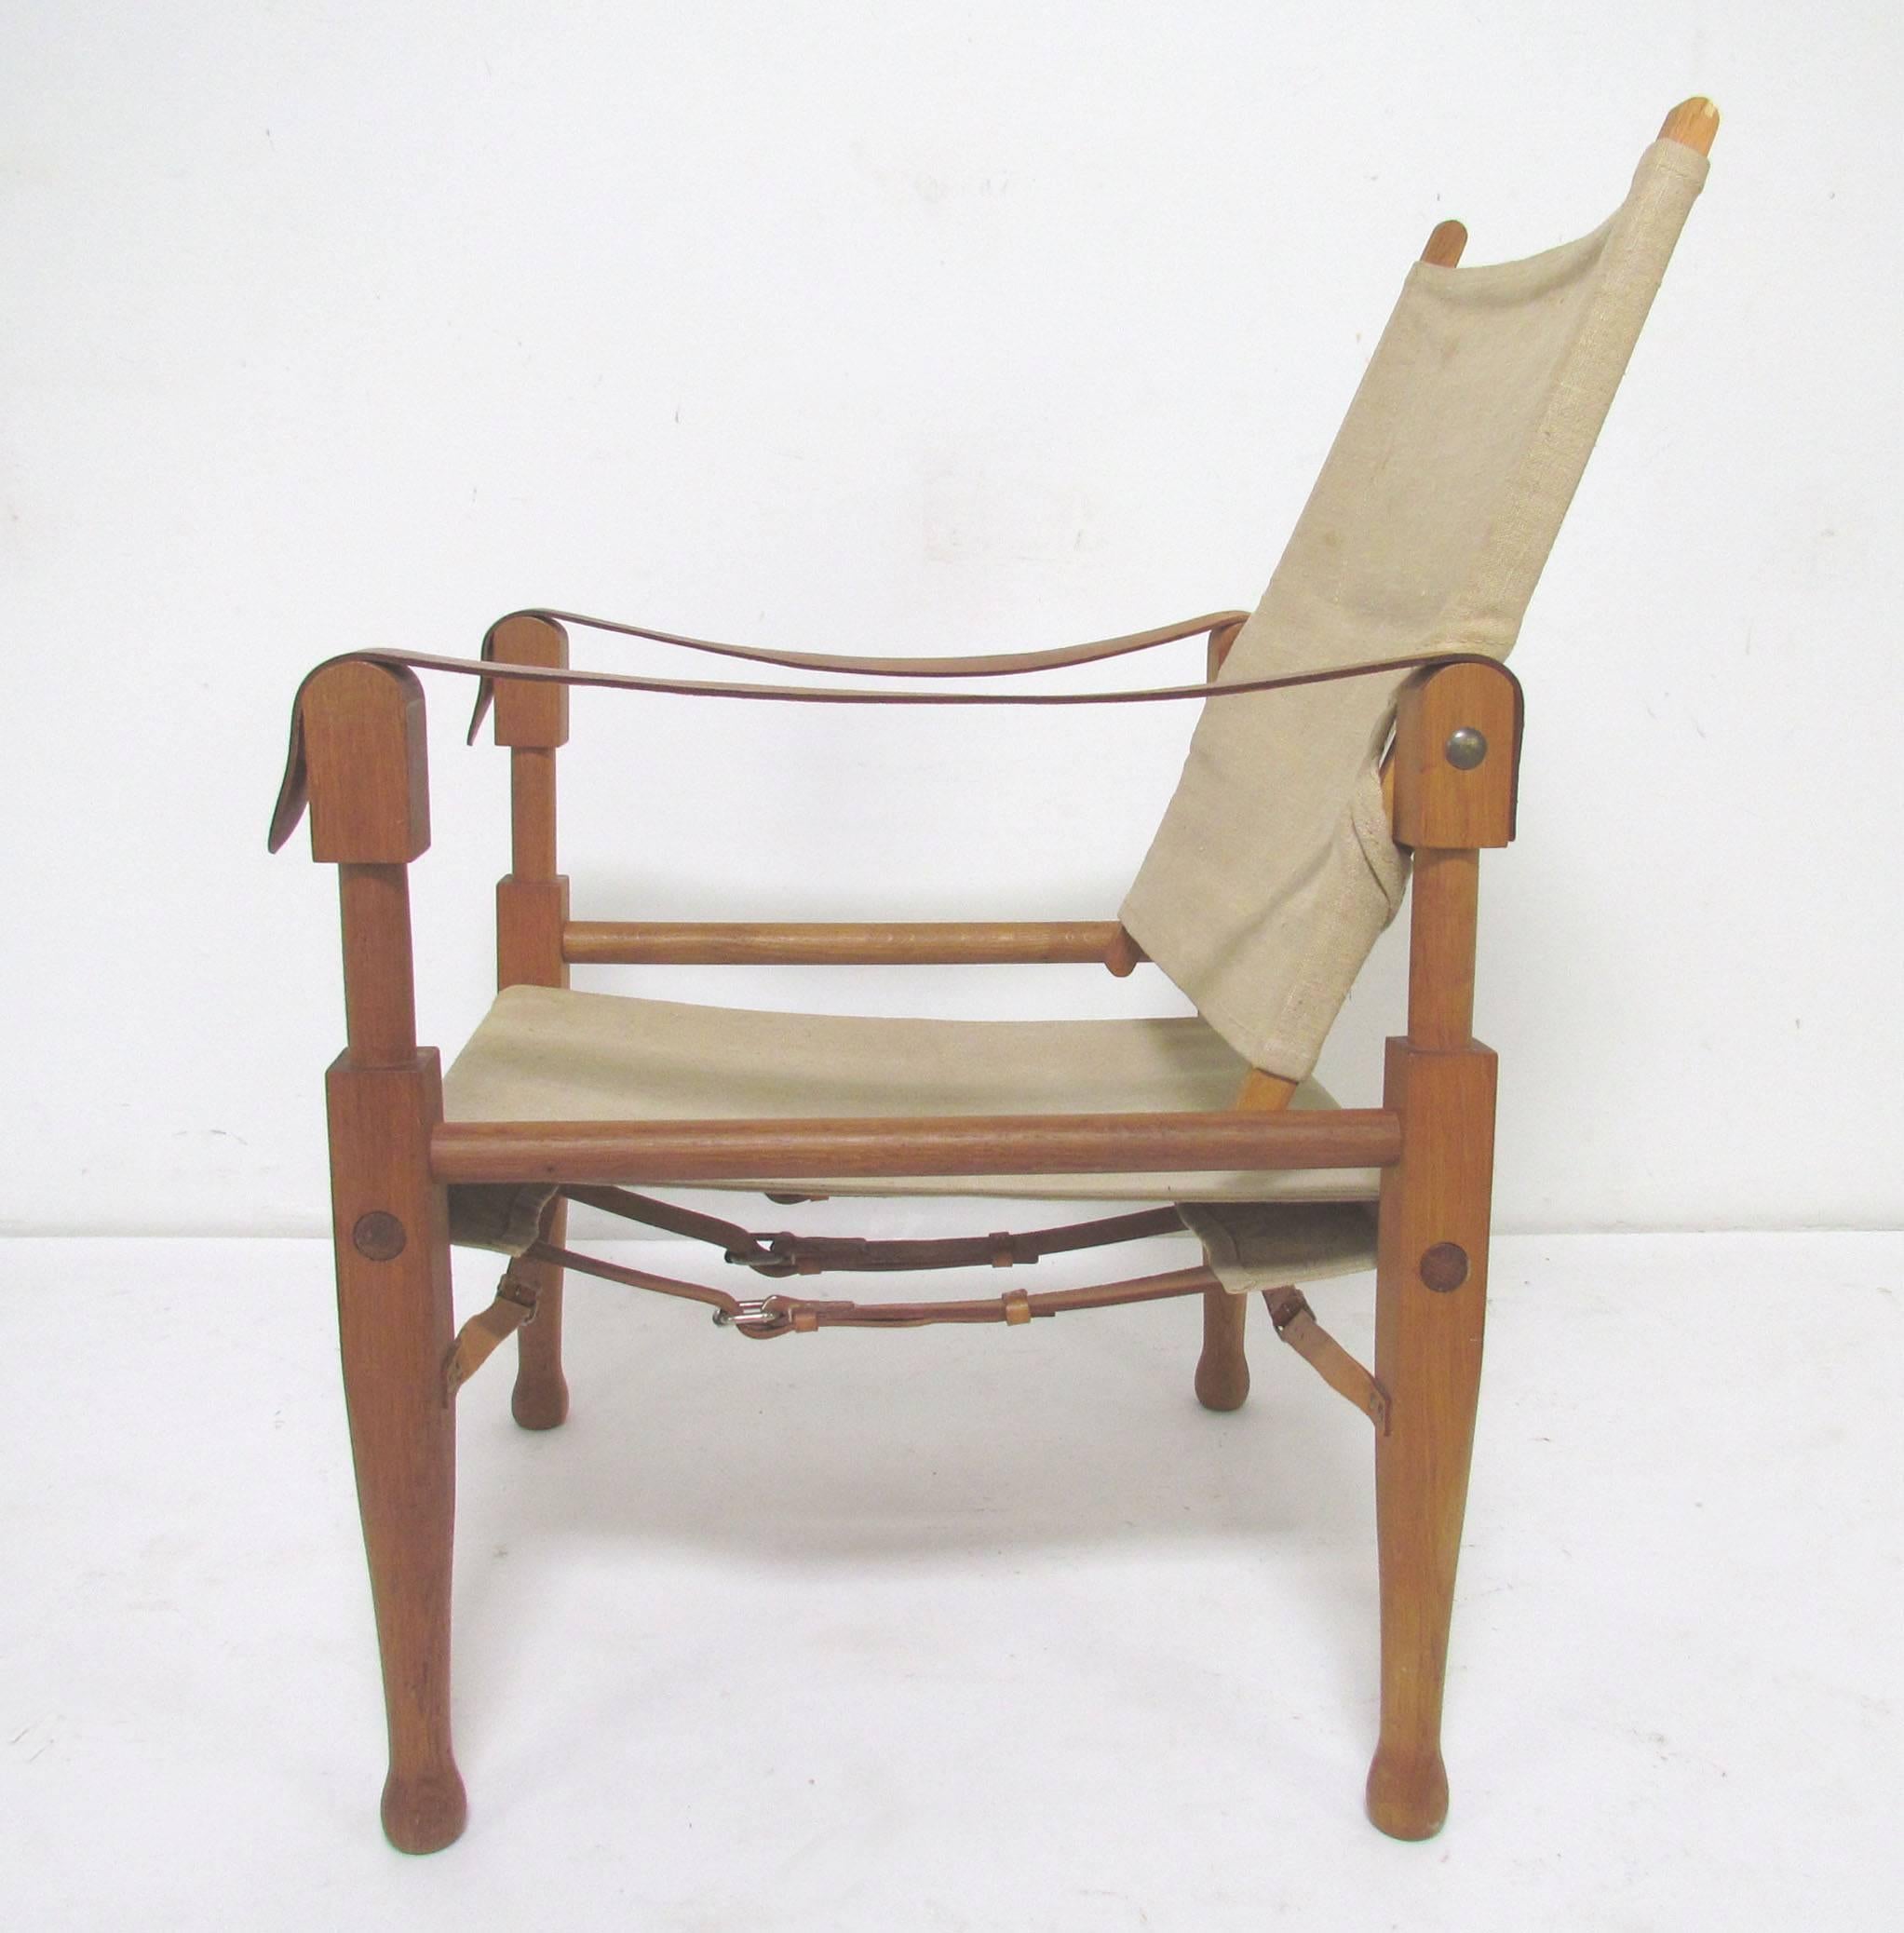 Safari sling chair by Wilhelm Kienzle for Wohnbedarf, made in Switzerland, circa 1960s. Reinforced canvas seat and back with strap leather arms.
   